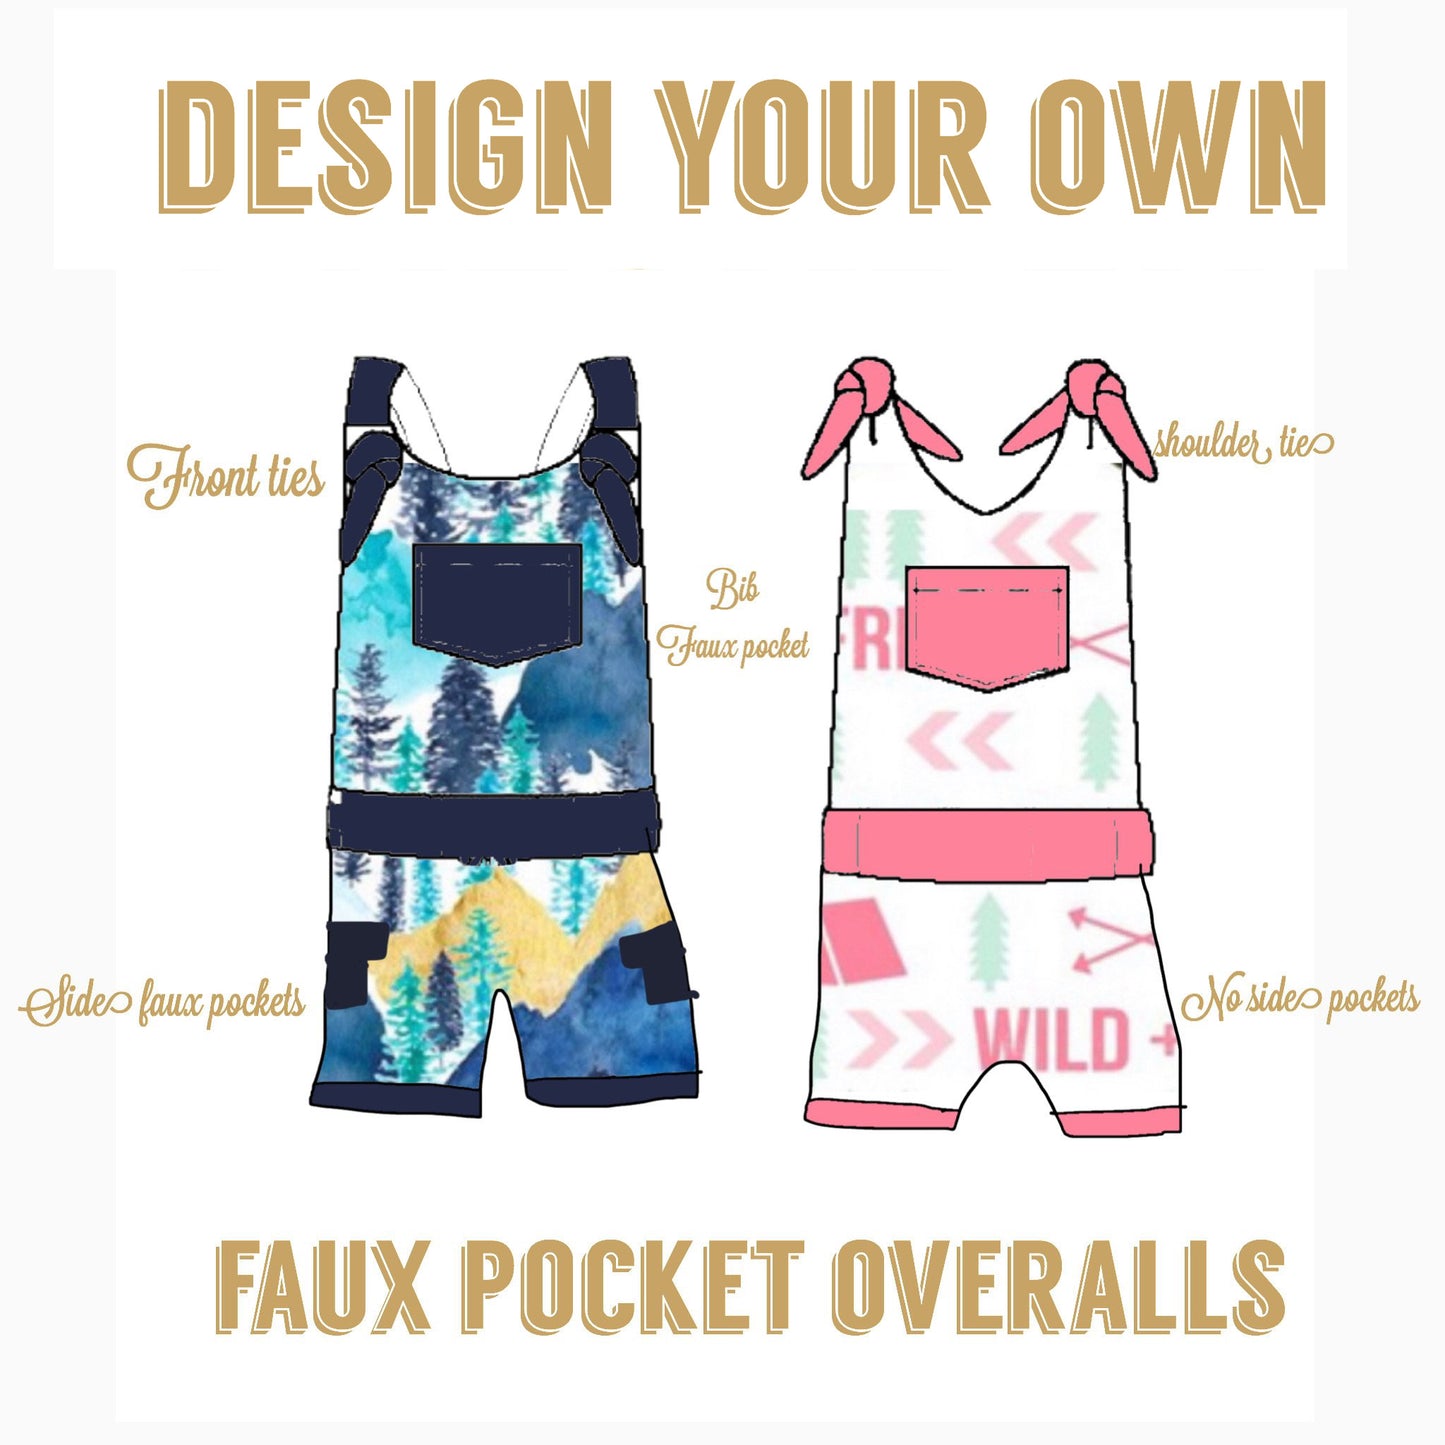 Design your own |Faux Pocket Overalls